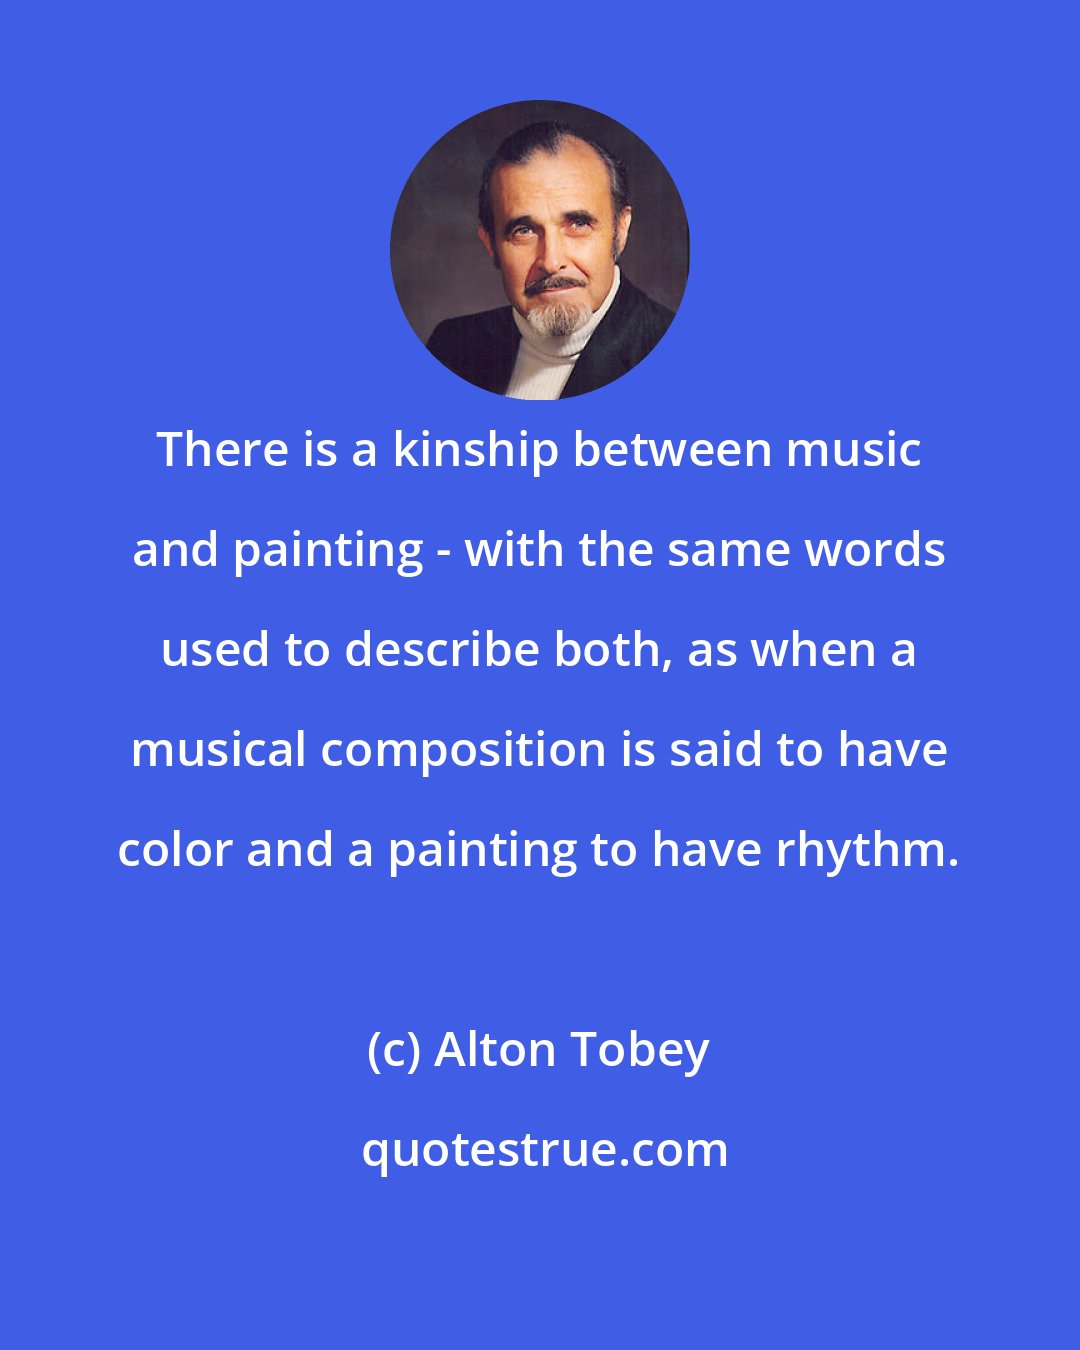 Alton Tobey: There is a kinship between music and painting - with the same words used to describe both, as when a musical composition is said to have color and a painting to have rhythm.